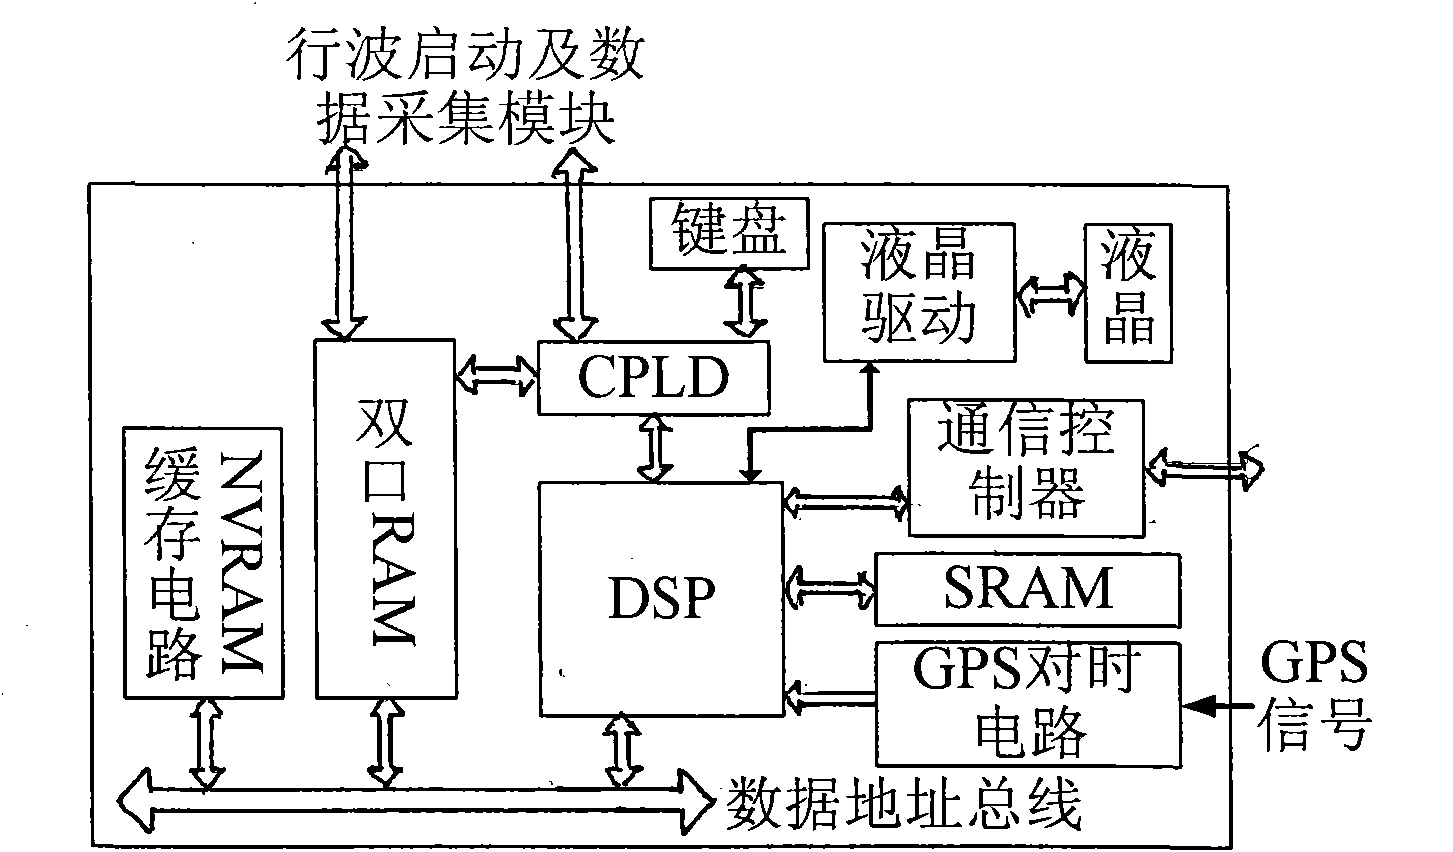 Single-terminal failure wave-recording and distance-measuring device facing single space in transformer substation